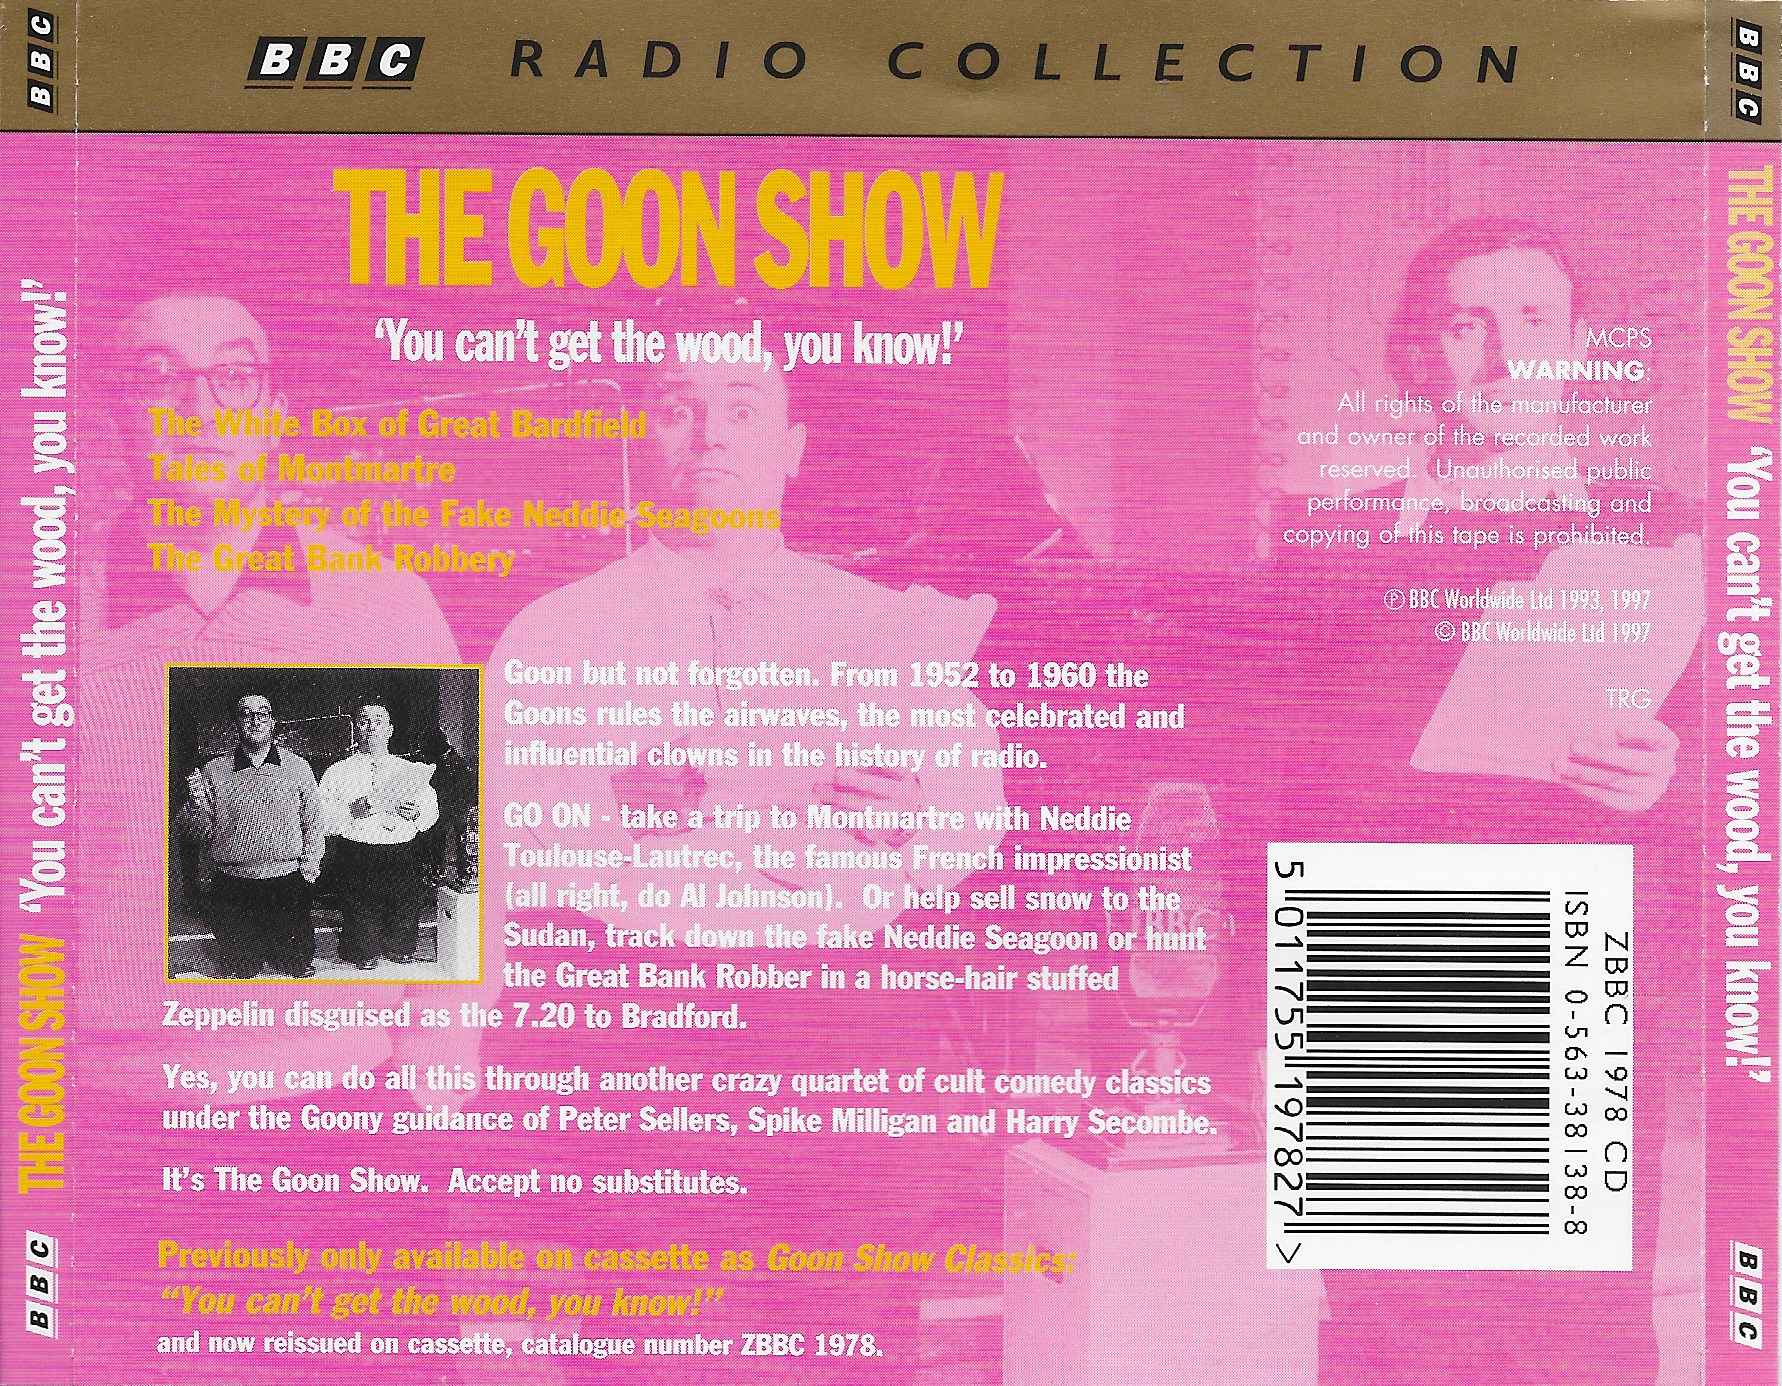 Picture of ZBBC 1978 CD The Goon Show 10 - You can't get the wood, you know! by artist Spike Milligan / Eric Sykes / Larry Stephens from the BBC records and Tapes library